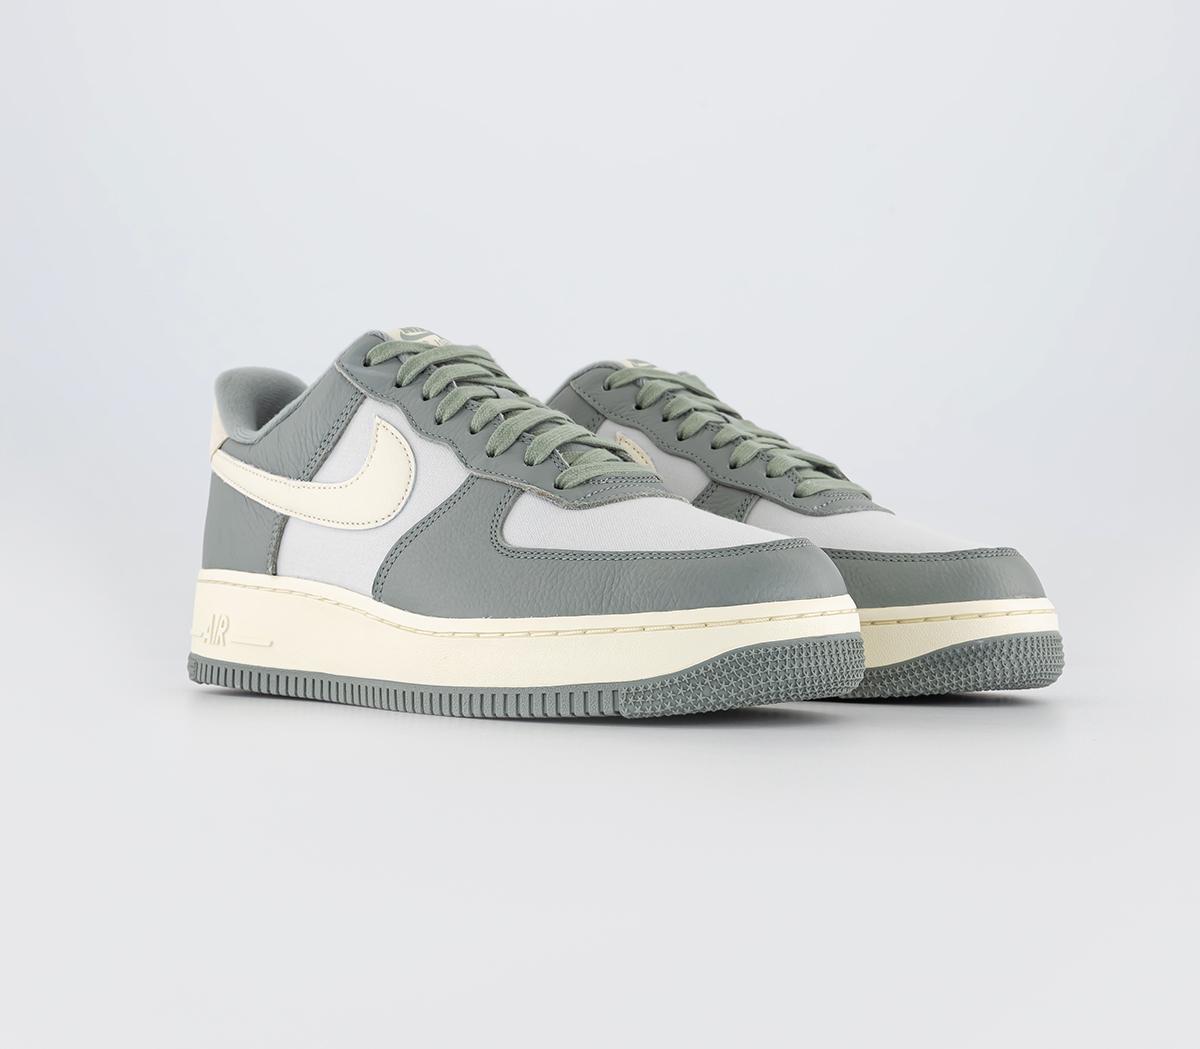 Nike Air Force 1 07 Trainers Mica Green Coconut Milk Photon Dust, 11.5